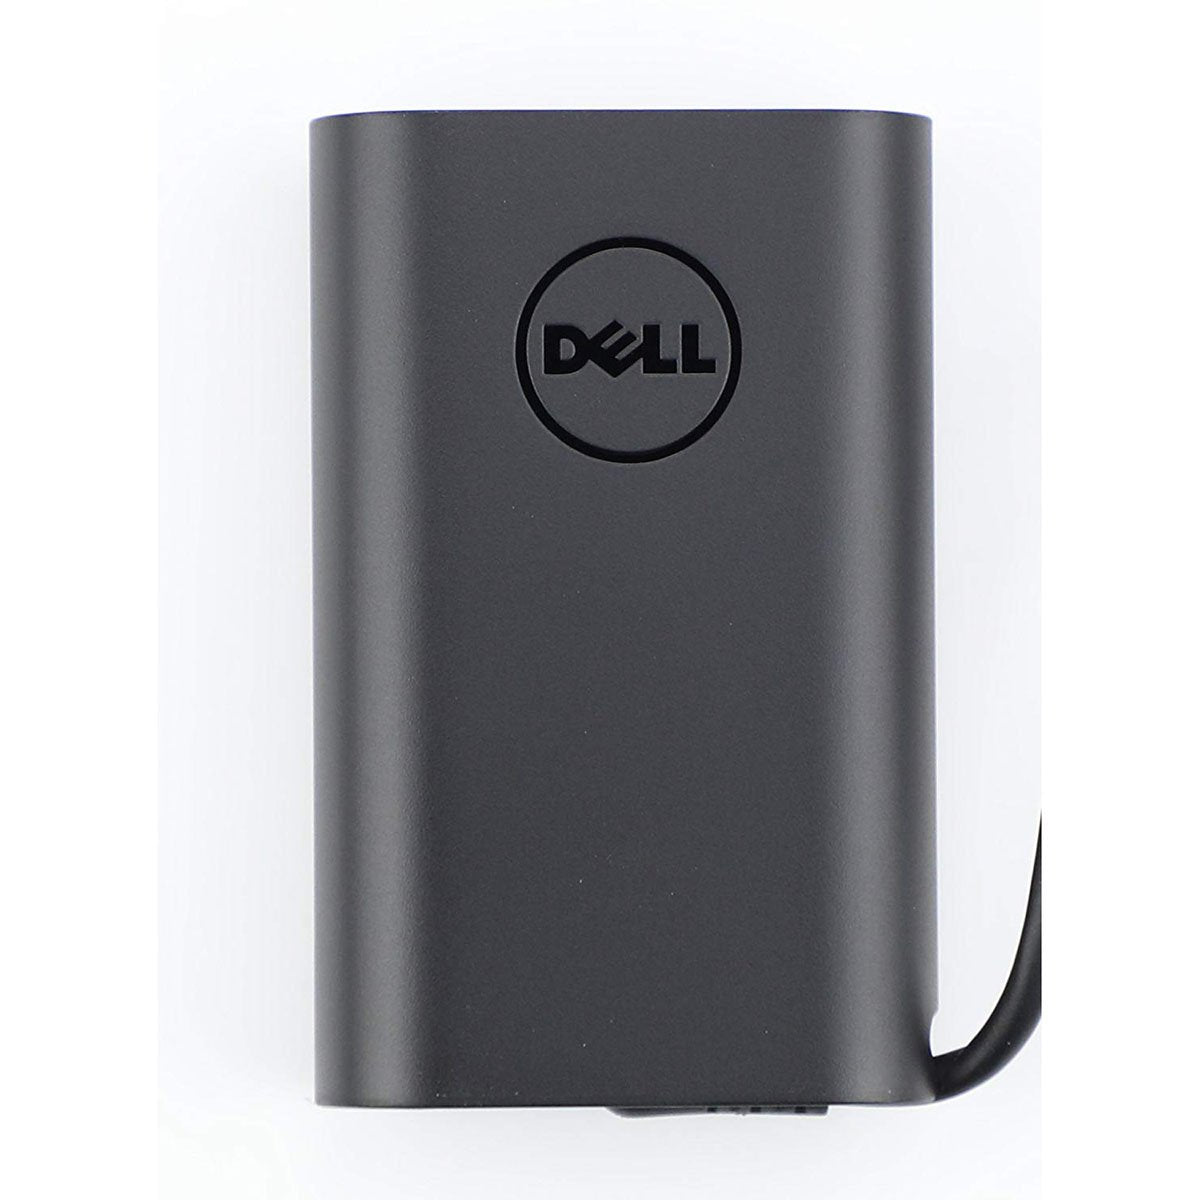 Dell Original 45W 20V USB Type C Laptop Charger Adapter for Latitude 5289 With Power Cord